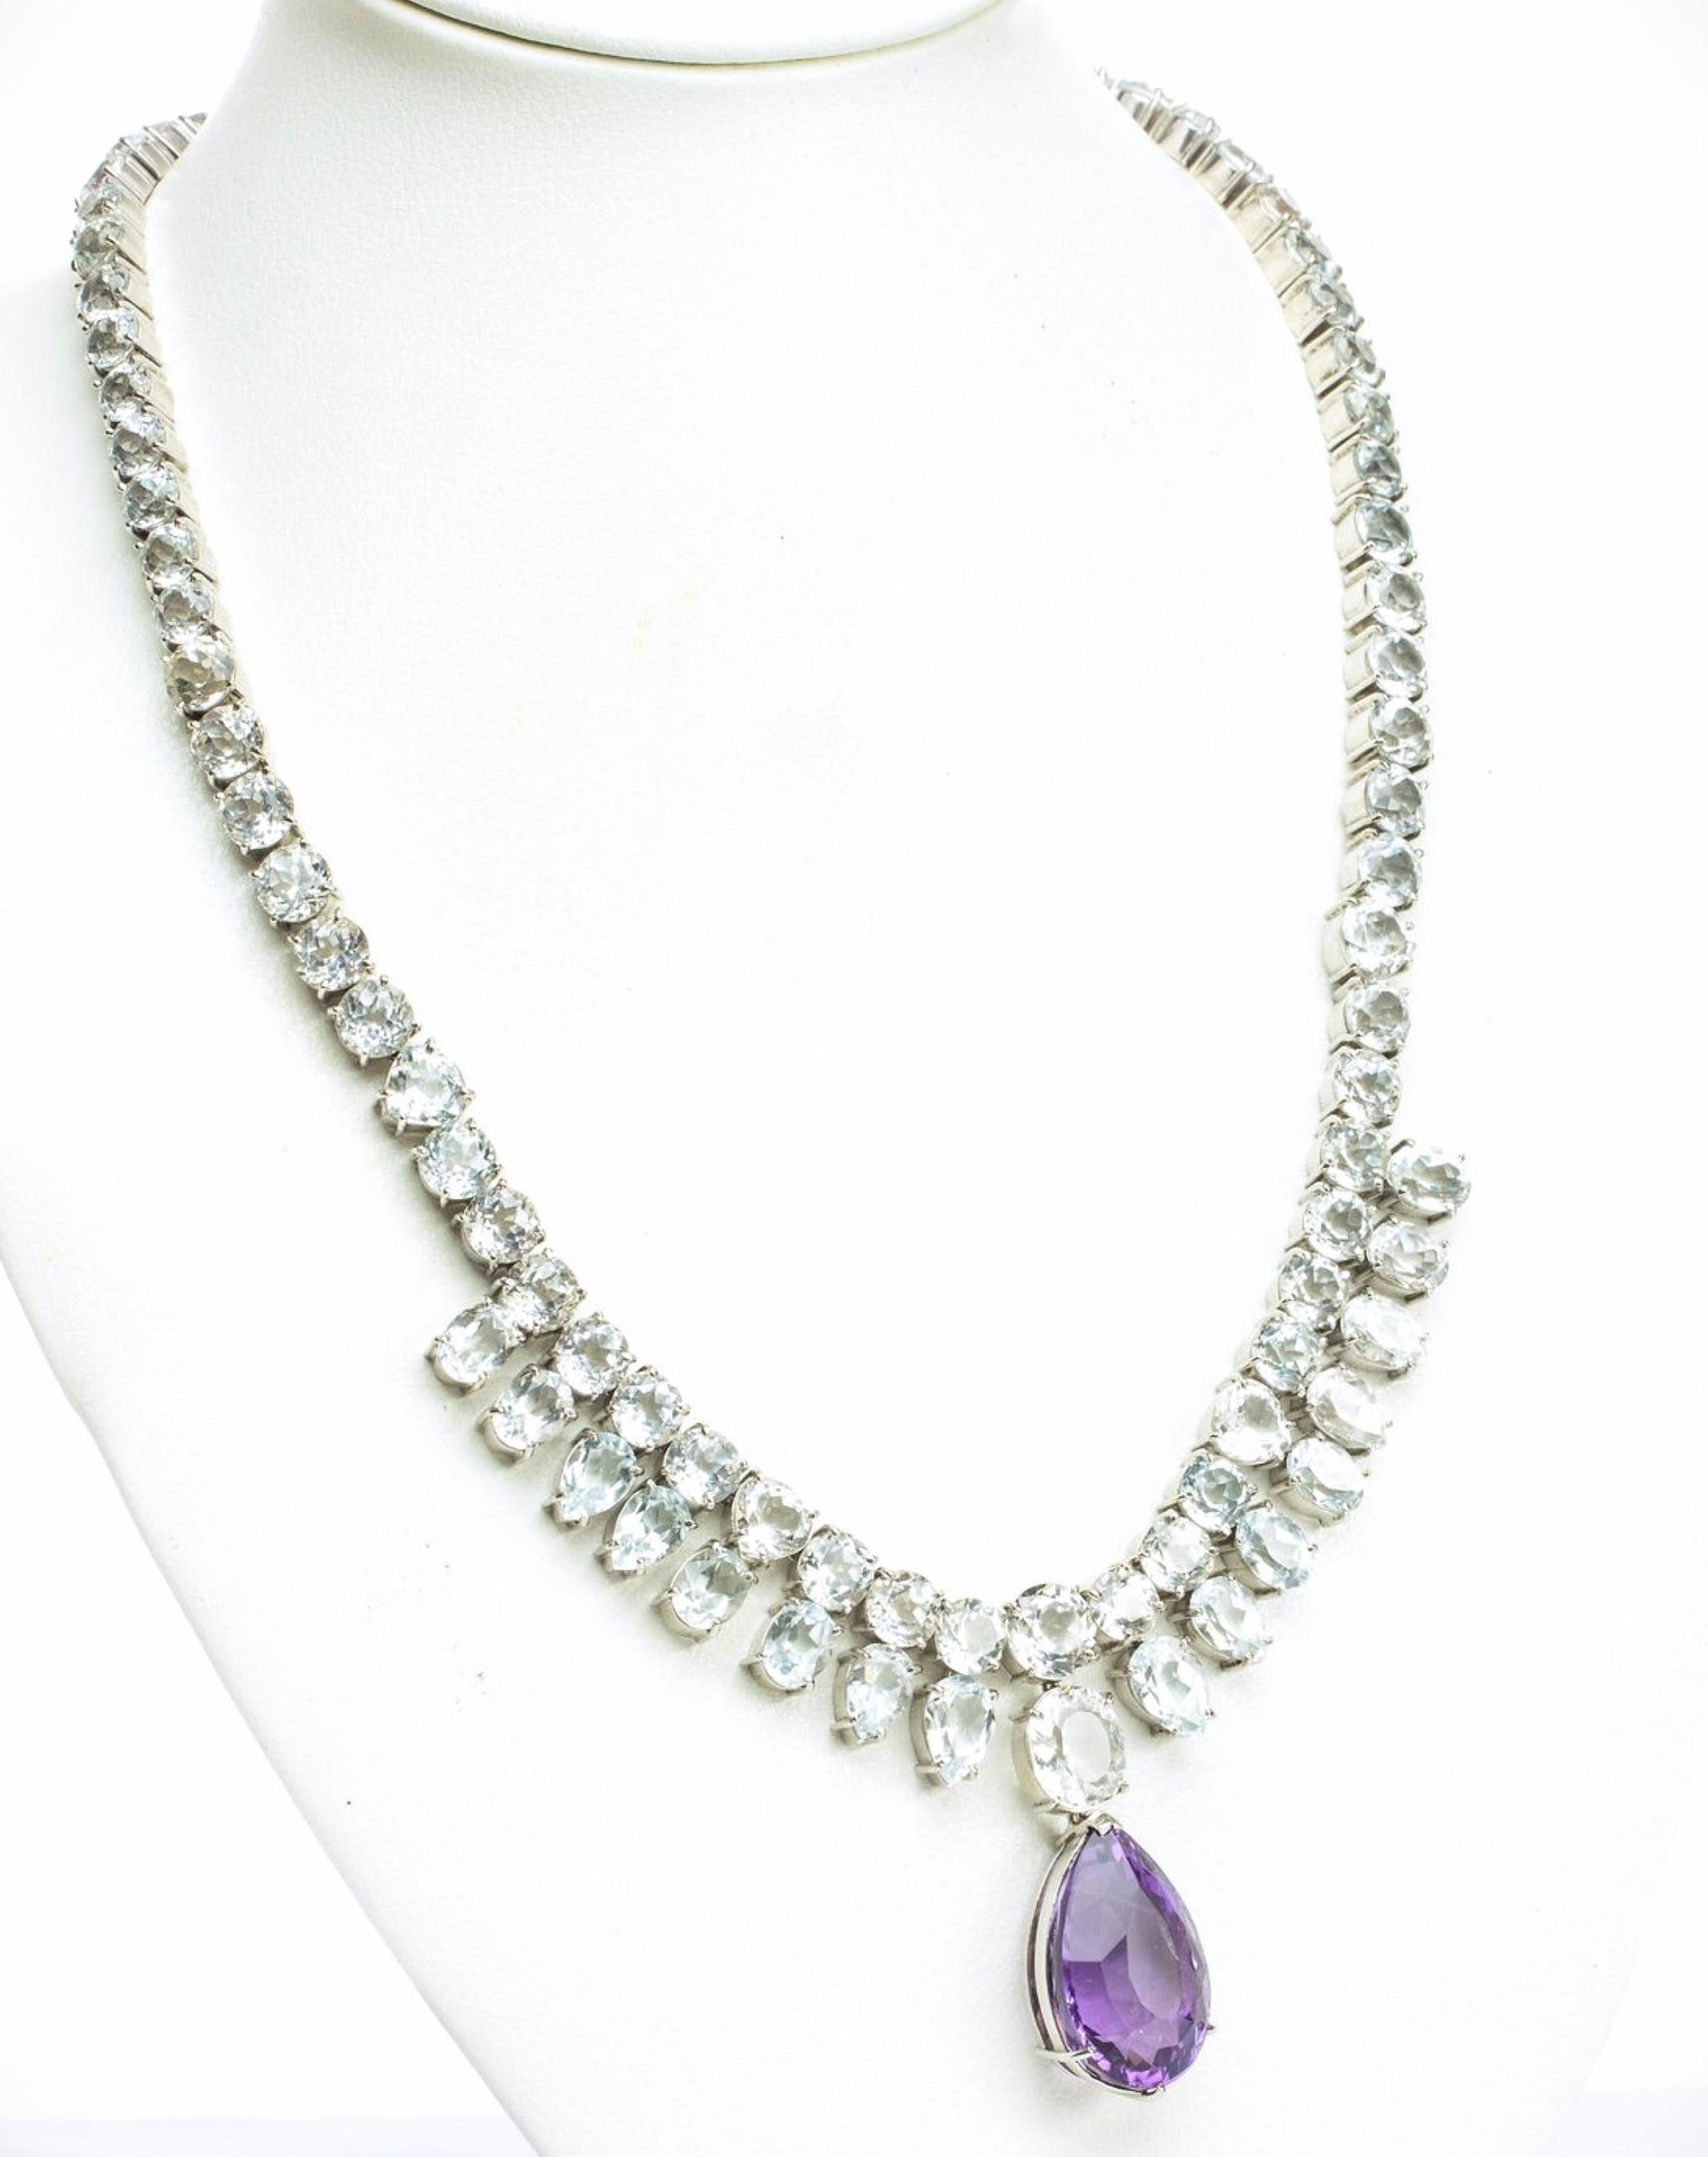 10ct Pear Cut Amethyst and Topaz Necklace For Sale 1